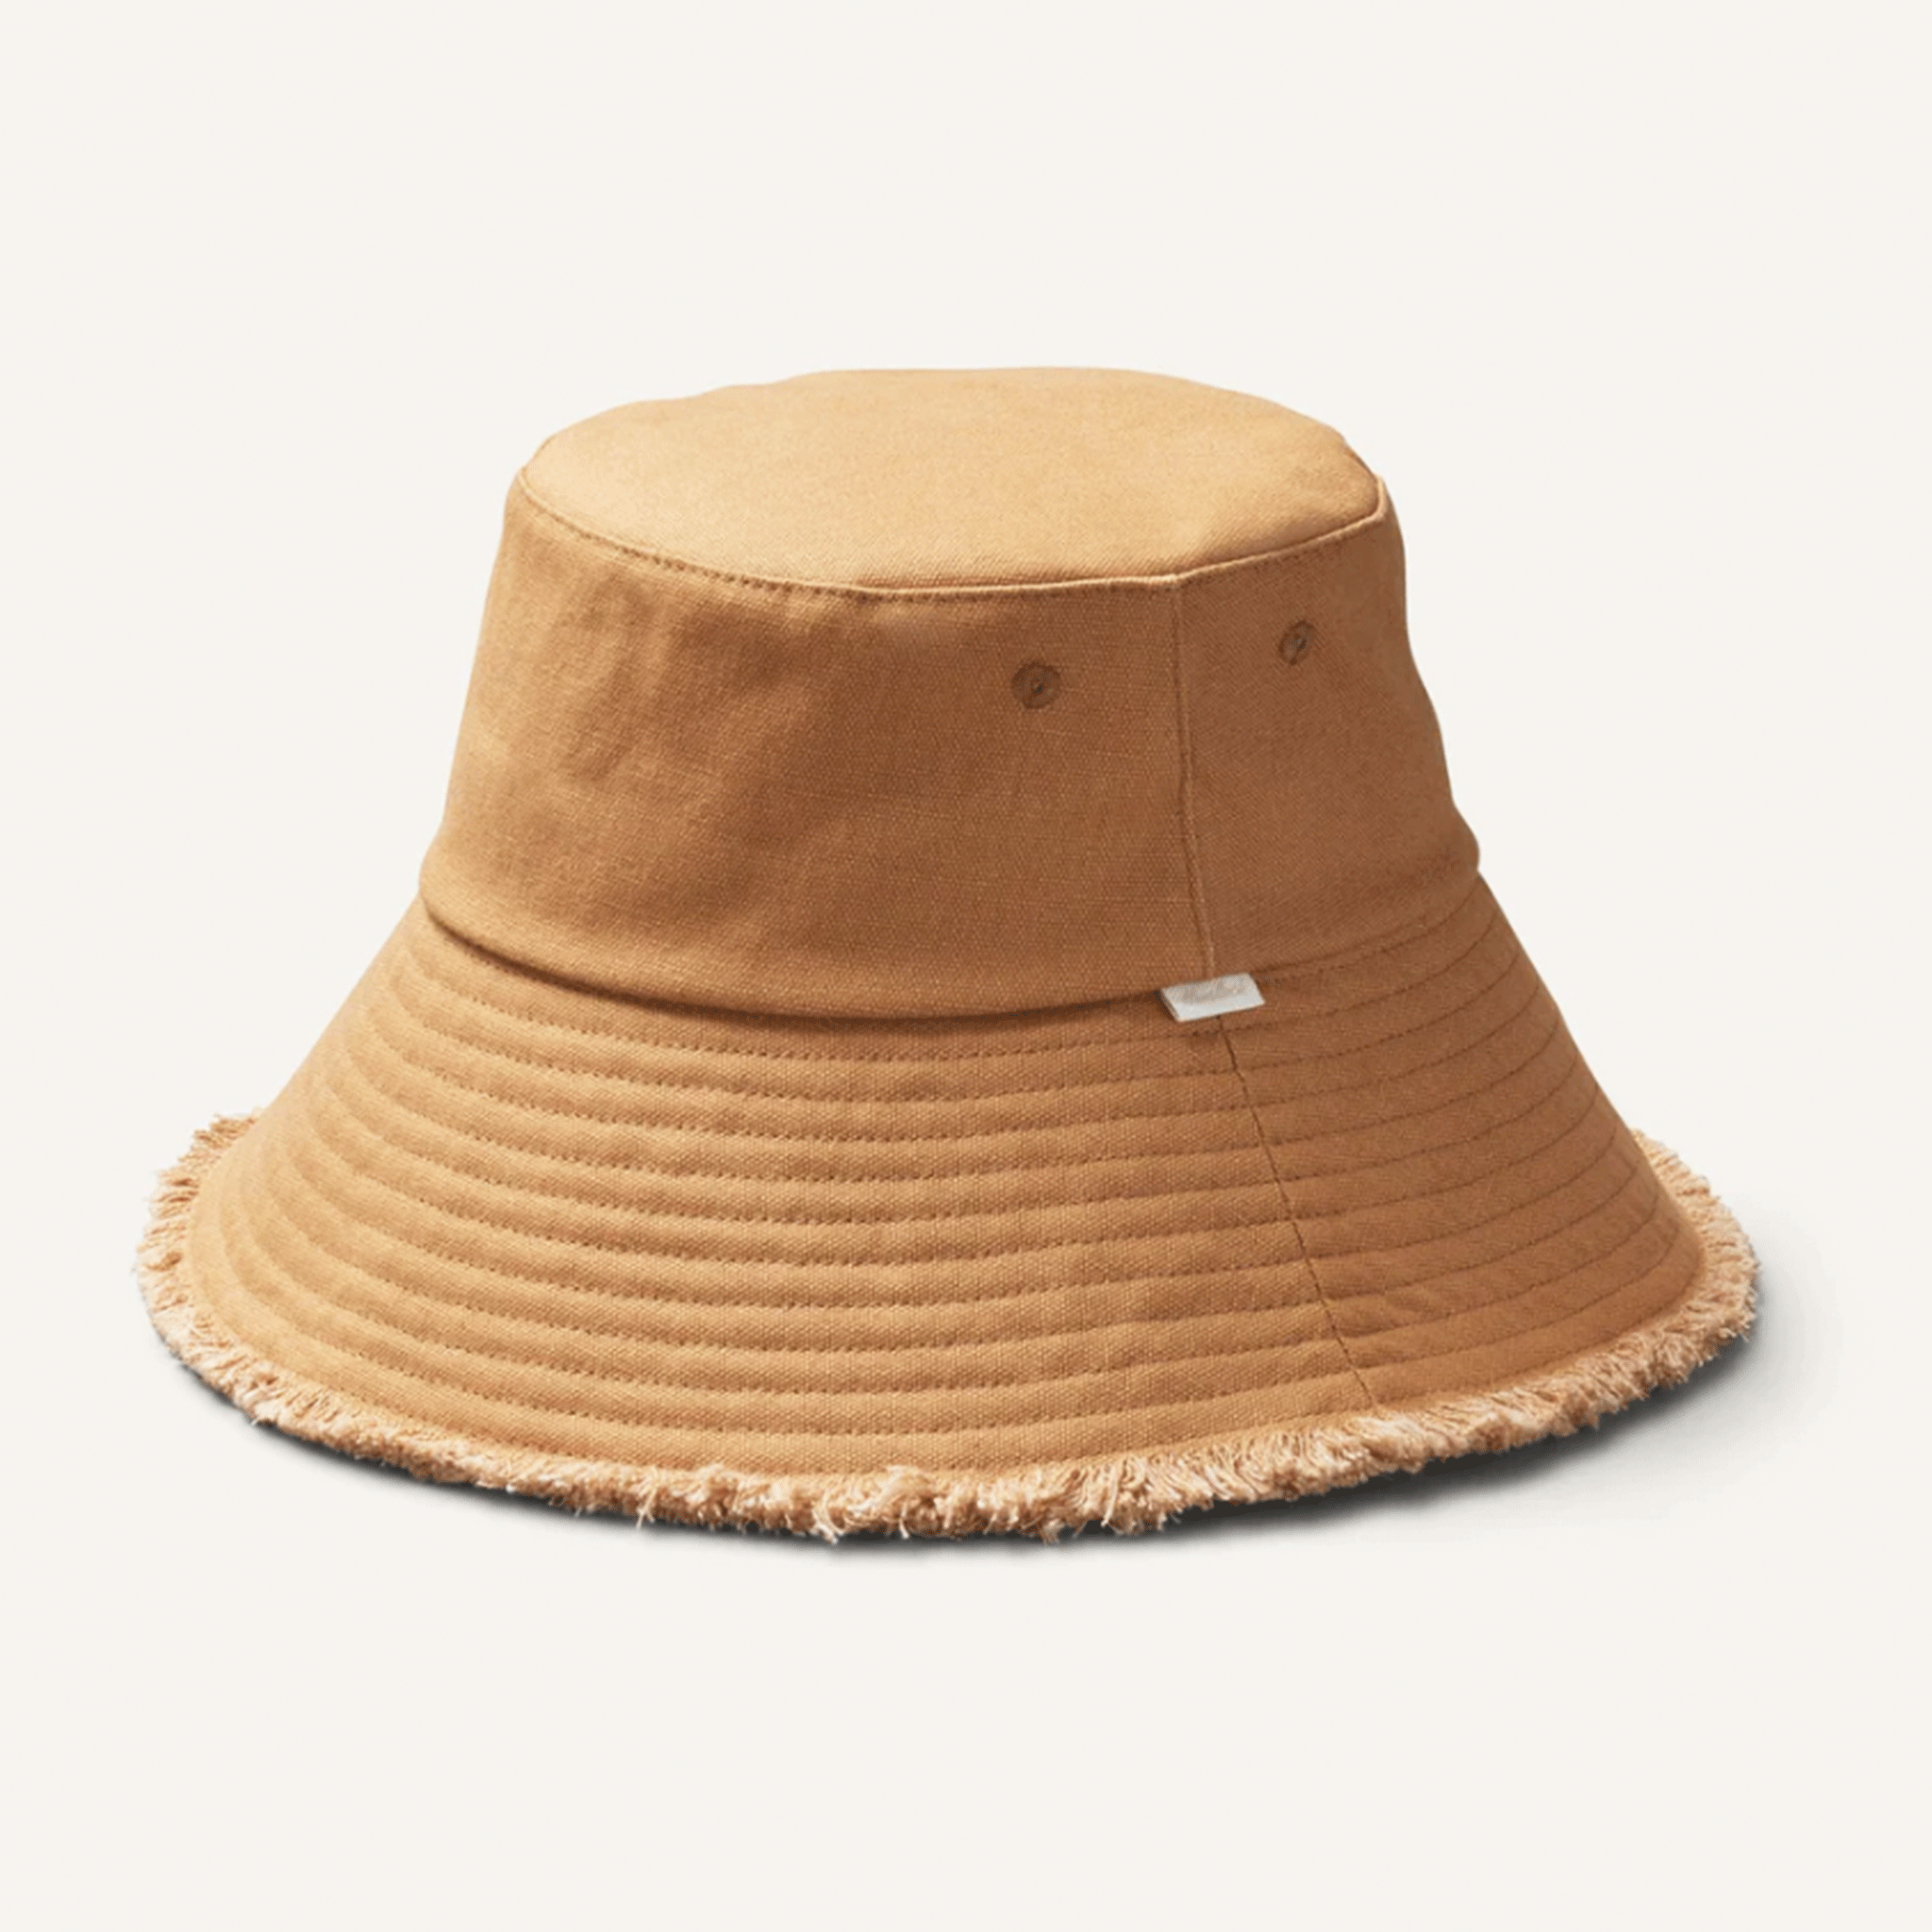 On a white background is a camel colored bucket hat with a subtle fringe around the edge of the brim. 